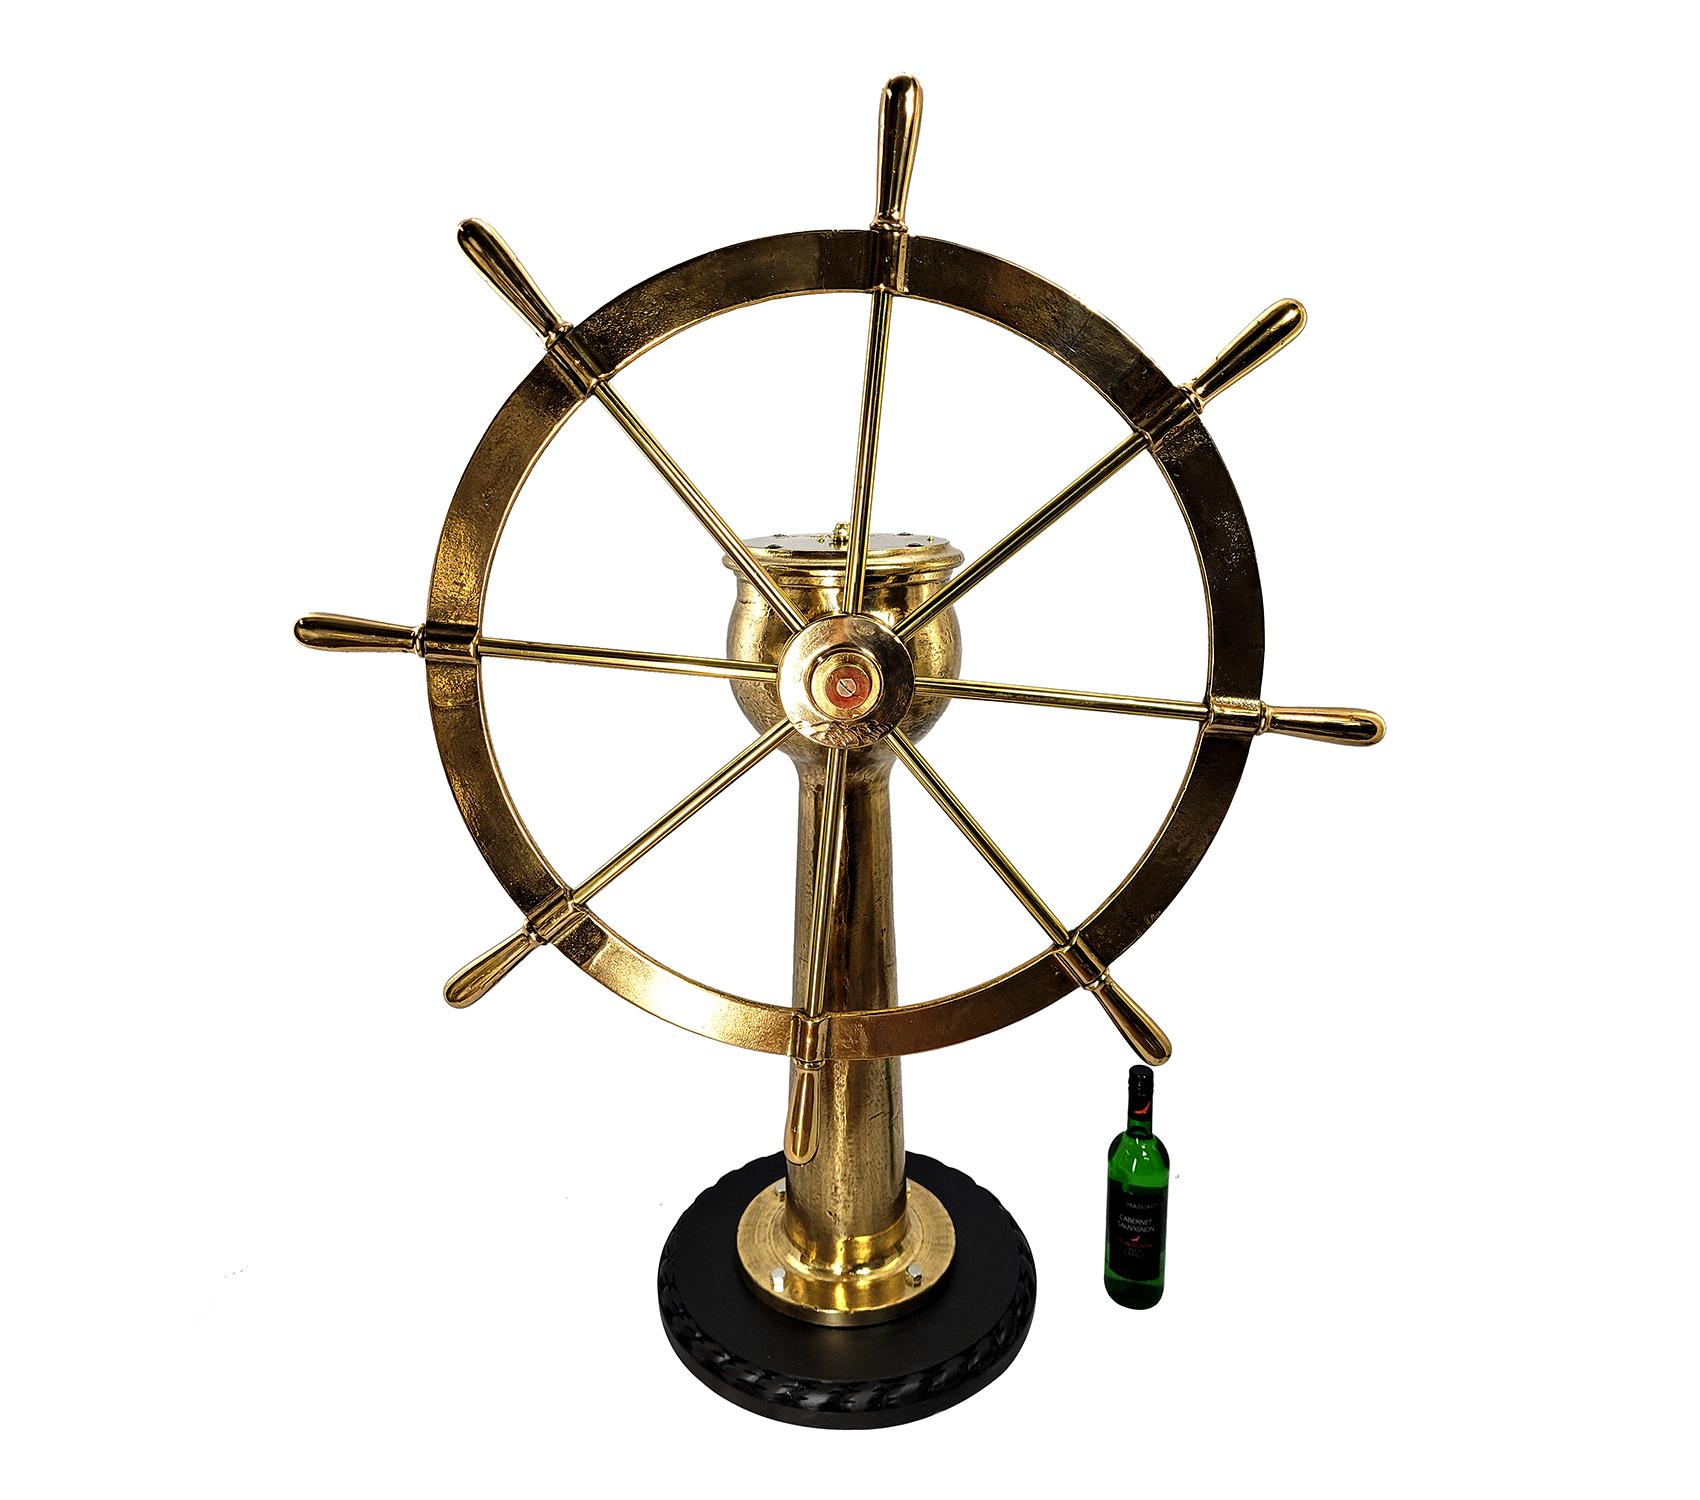 Very impressive eight spoke ships wheel mounted to a geared pedestal. The pedestal head is engraved Dake Engine Company, Grand Haven Michigan, serial number 6770 with rudder indicator arrow. Entire unit has been meticulously polished and lacquered.